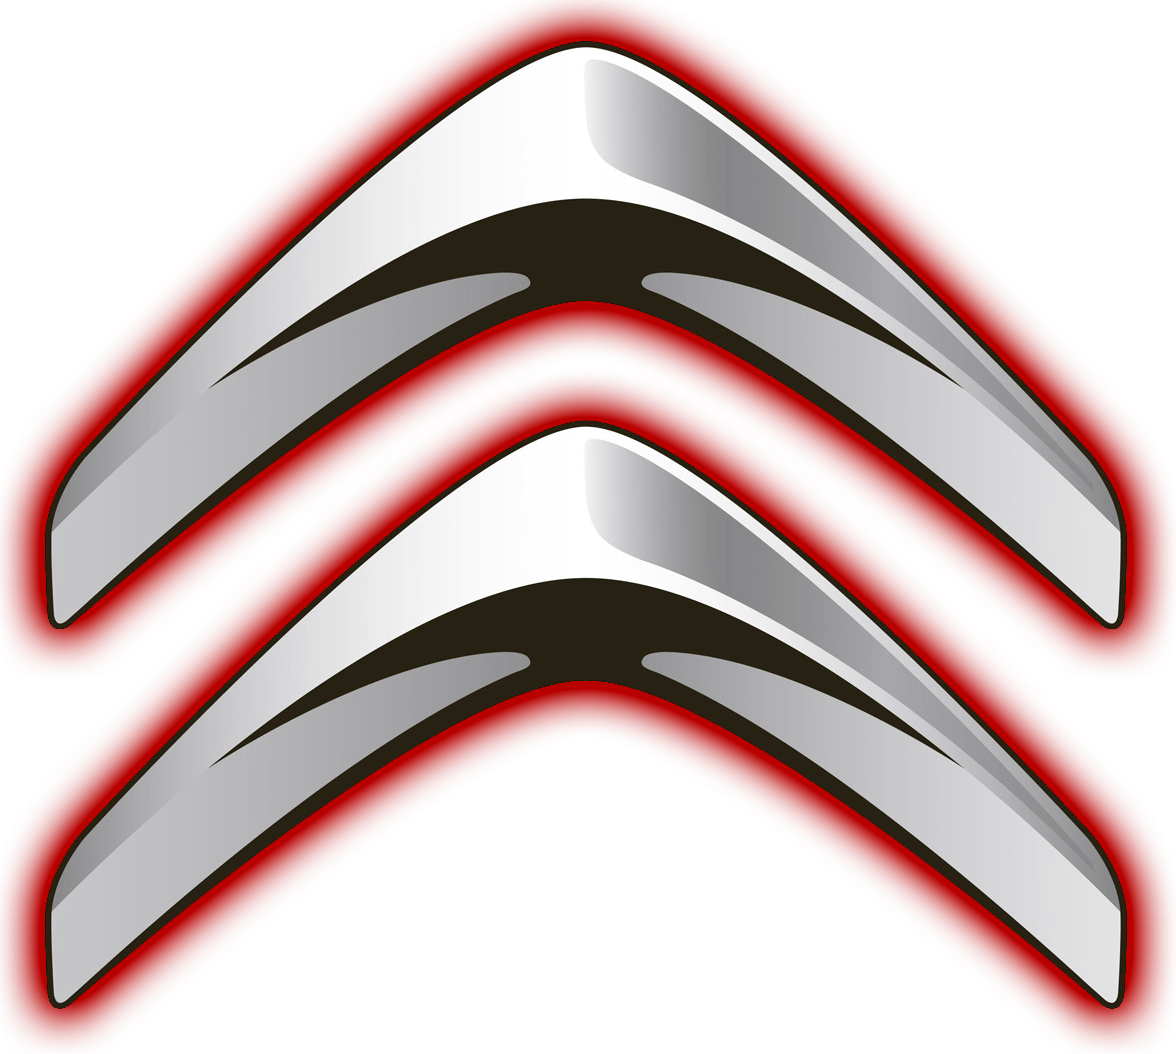 Citroen Logo - Citroen Logo, Citroen Car Symbol Meaning and History | Car Brand ...